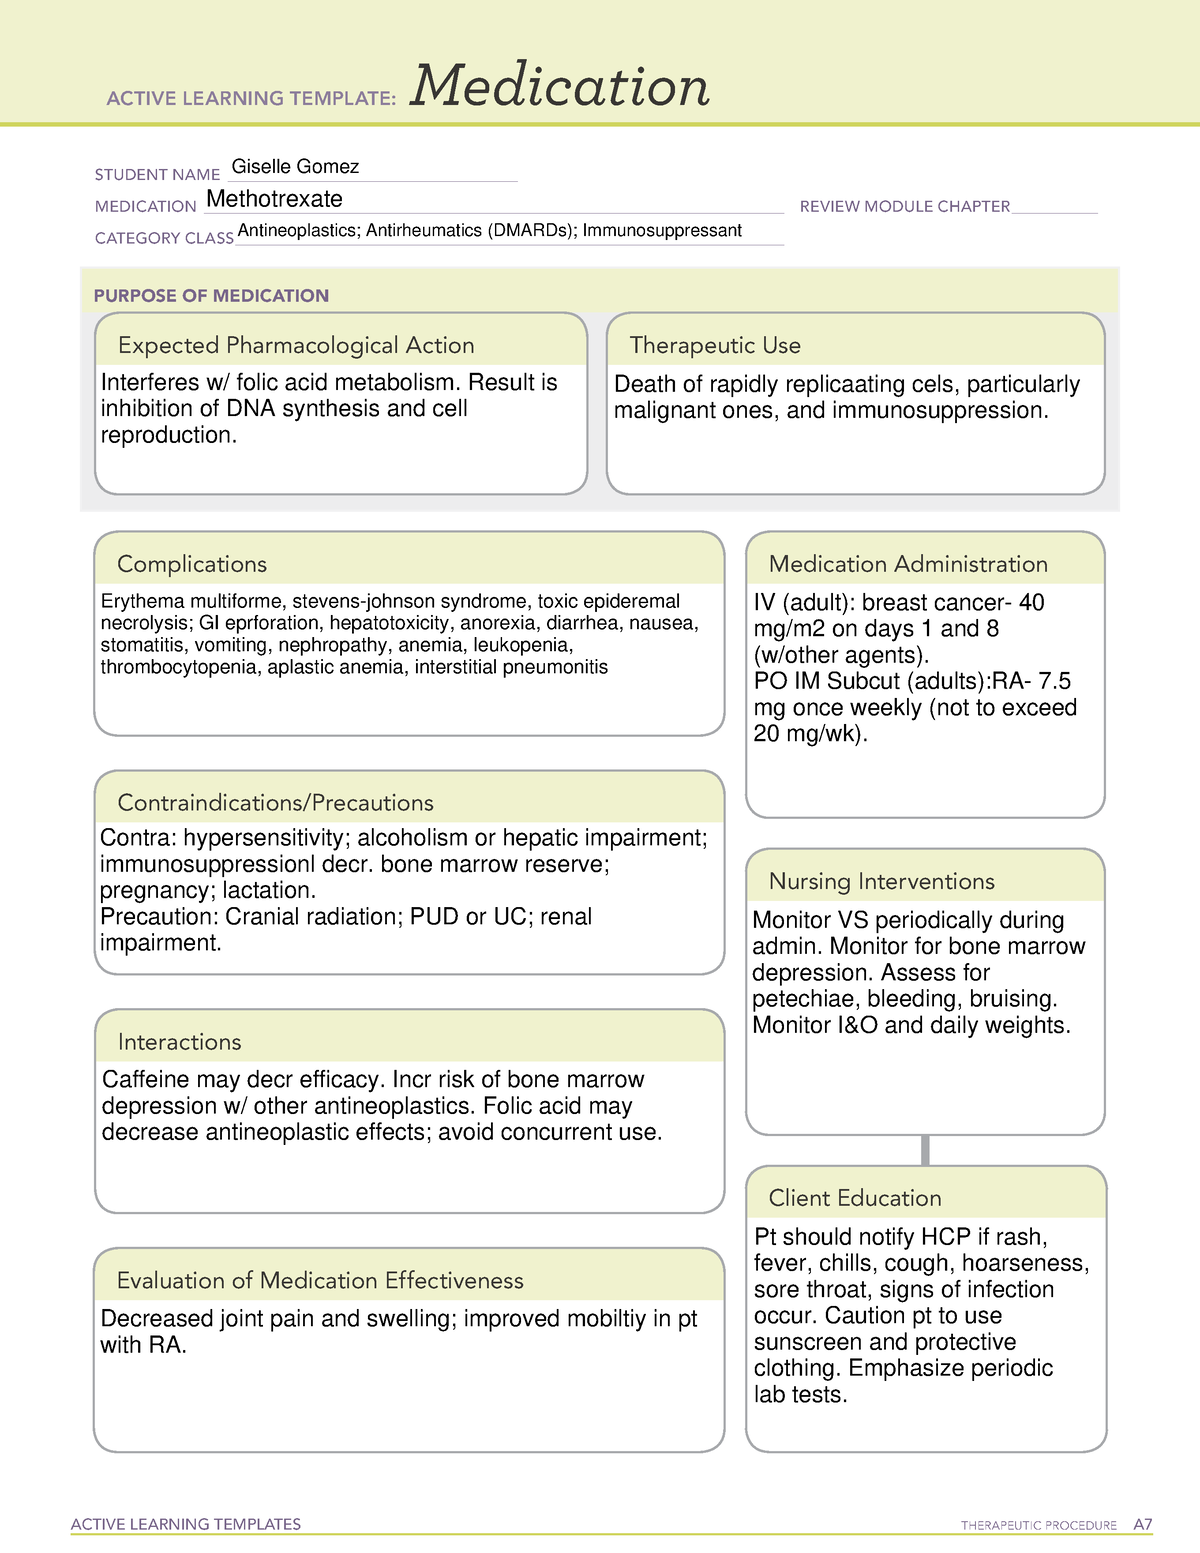 ATI Medication Template Methotrexate ACTIVE LEARNING TEMPLATES